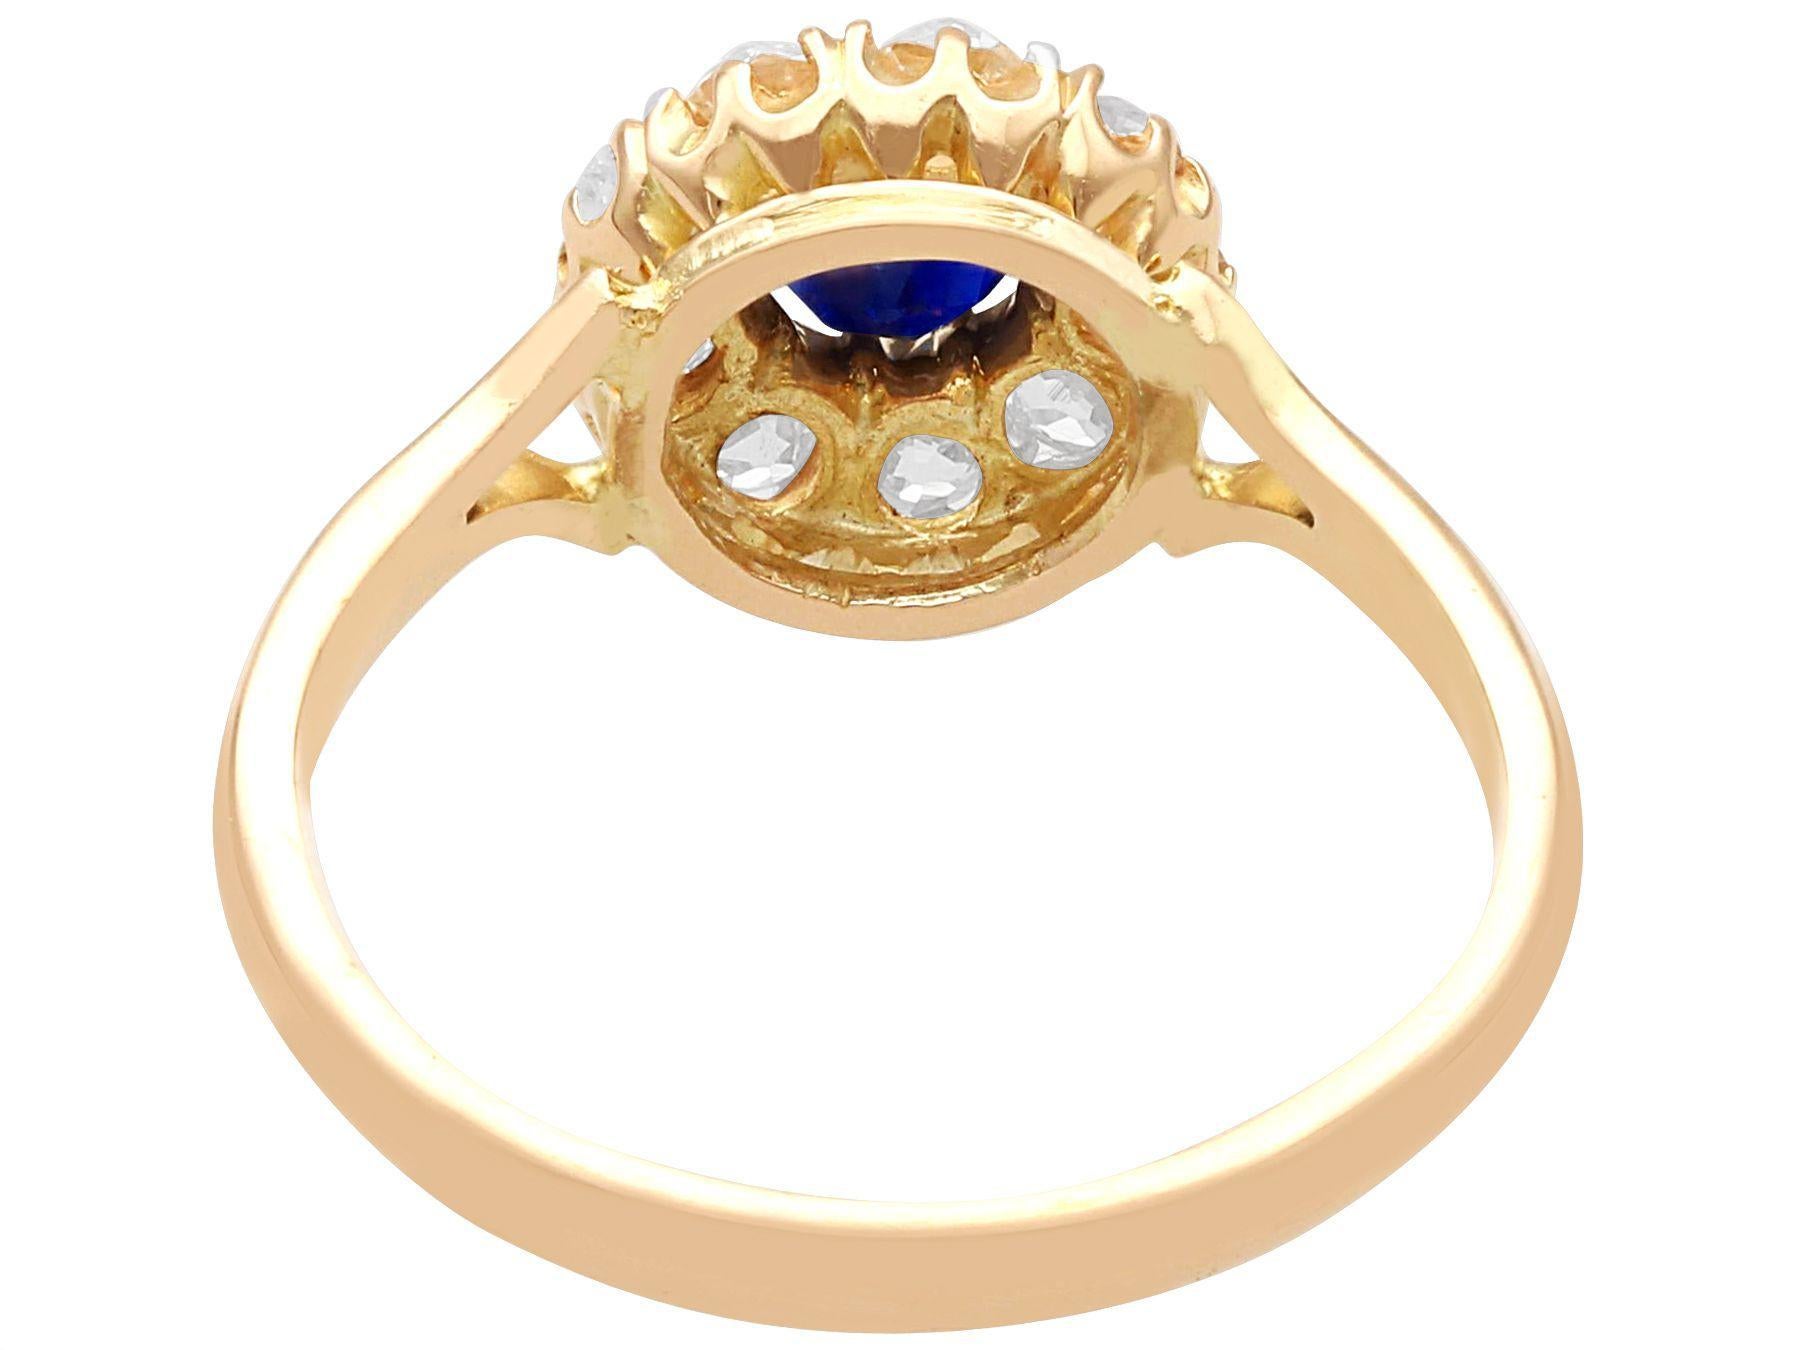 Antique 0.51 Carat Sapphire and 0.31 Carat Diamond Rose Gold Cluster Ring In Excellent Condition For Sale In Jesmond, Newcastle Upon Tyne